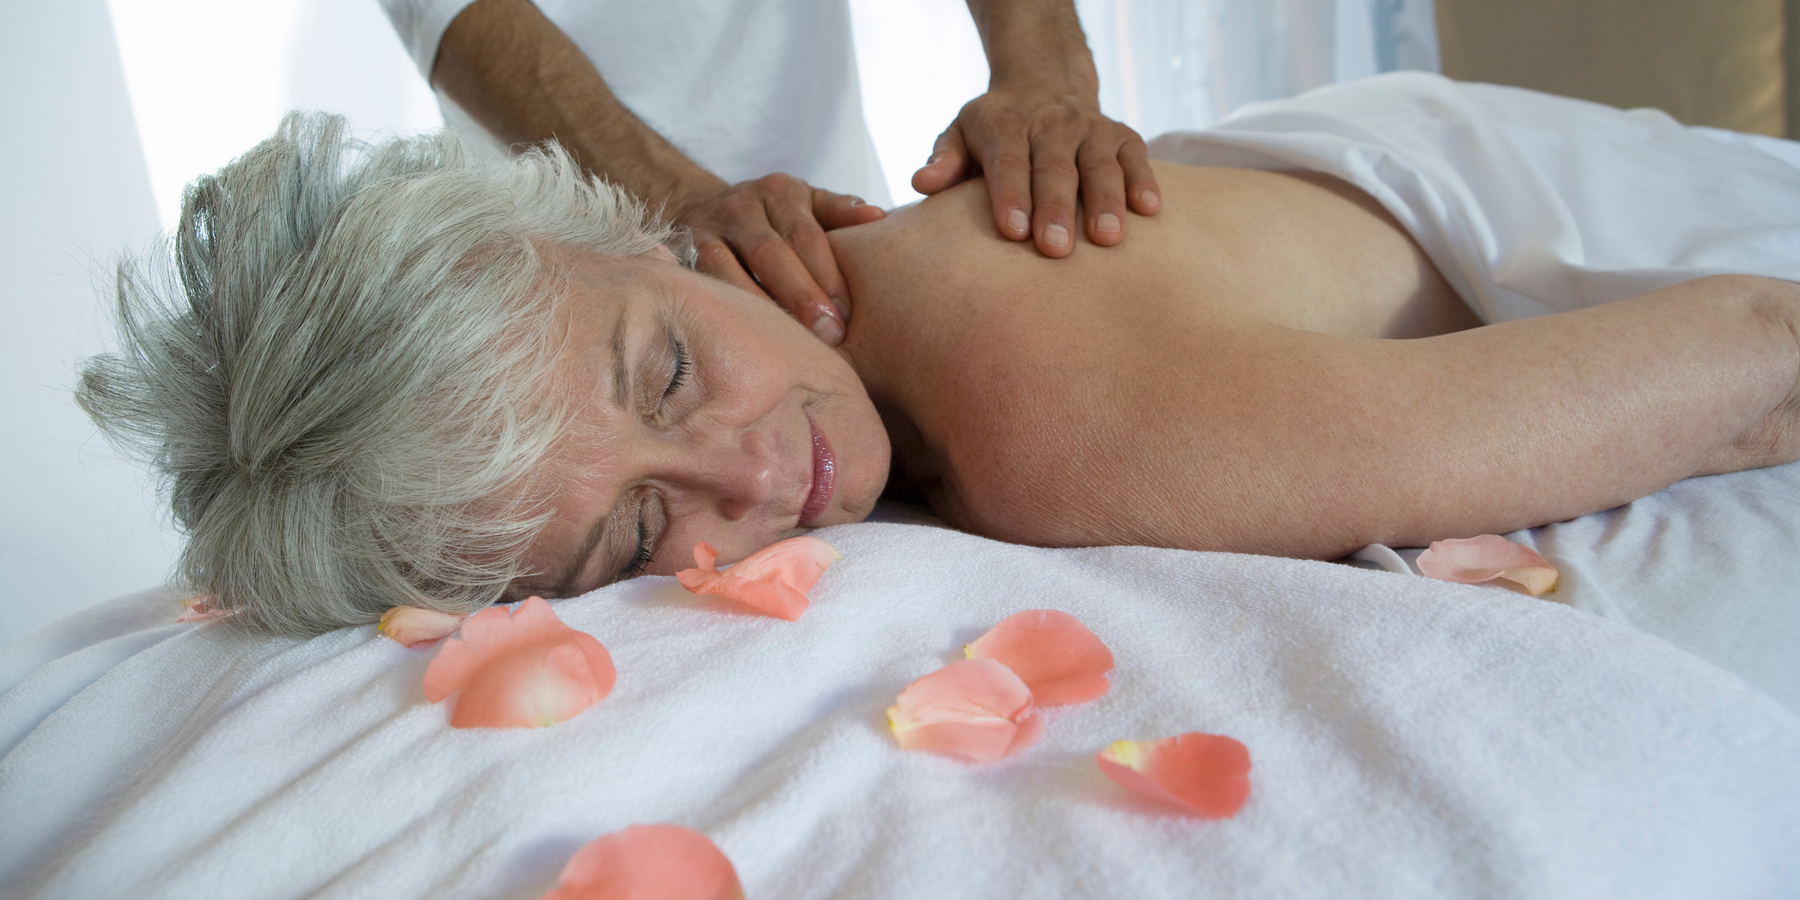 Safety Precautions for Senior Massage Therapy